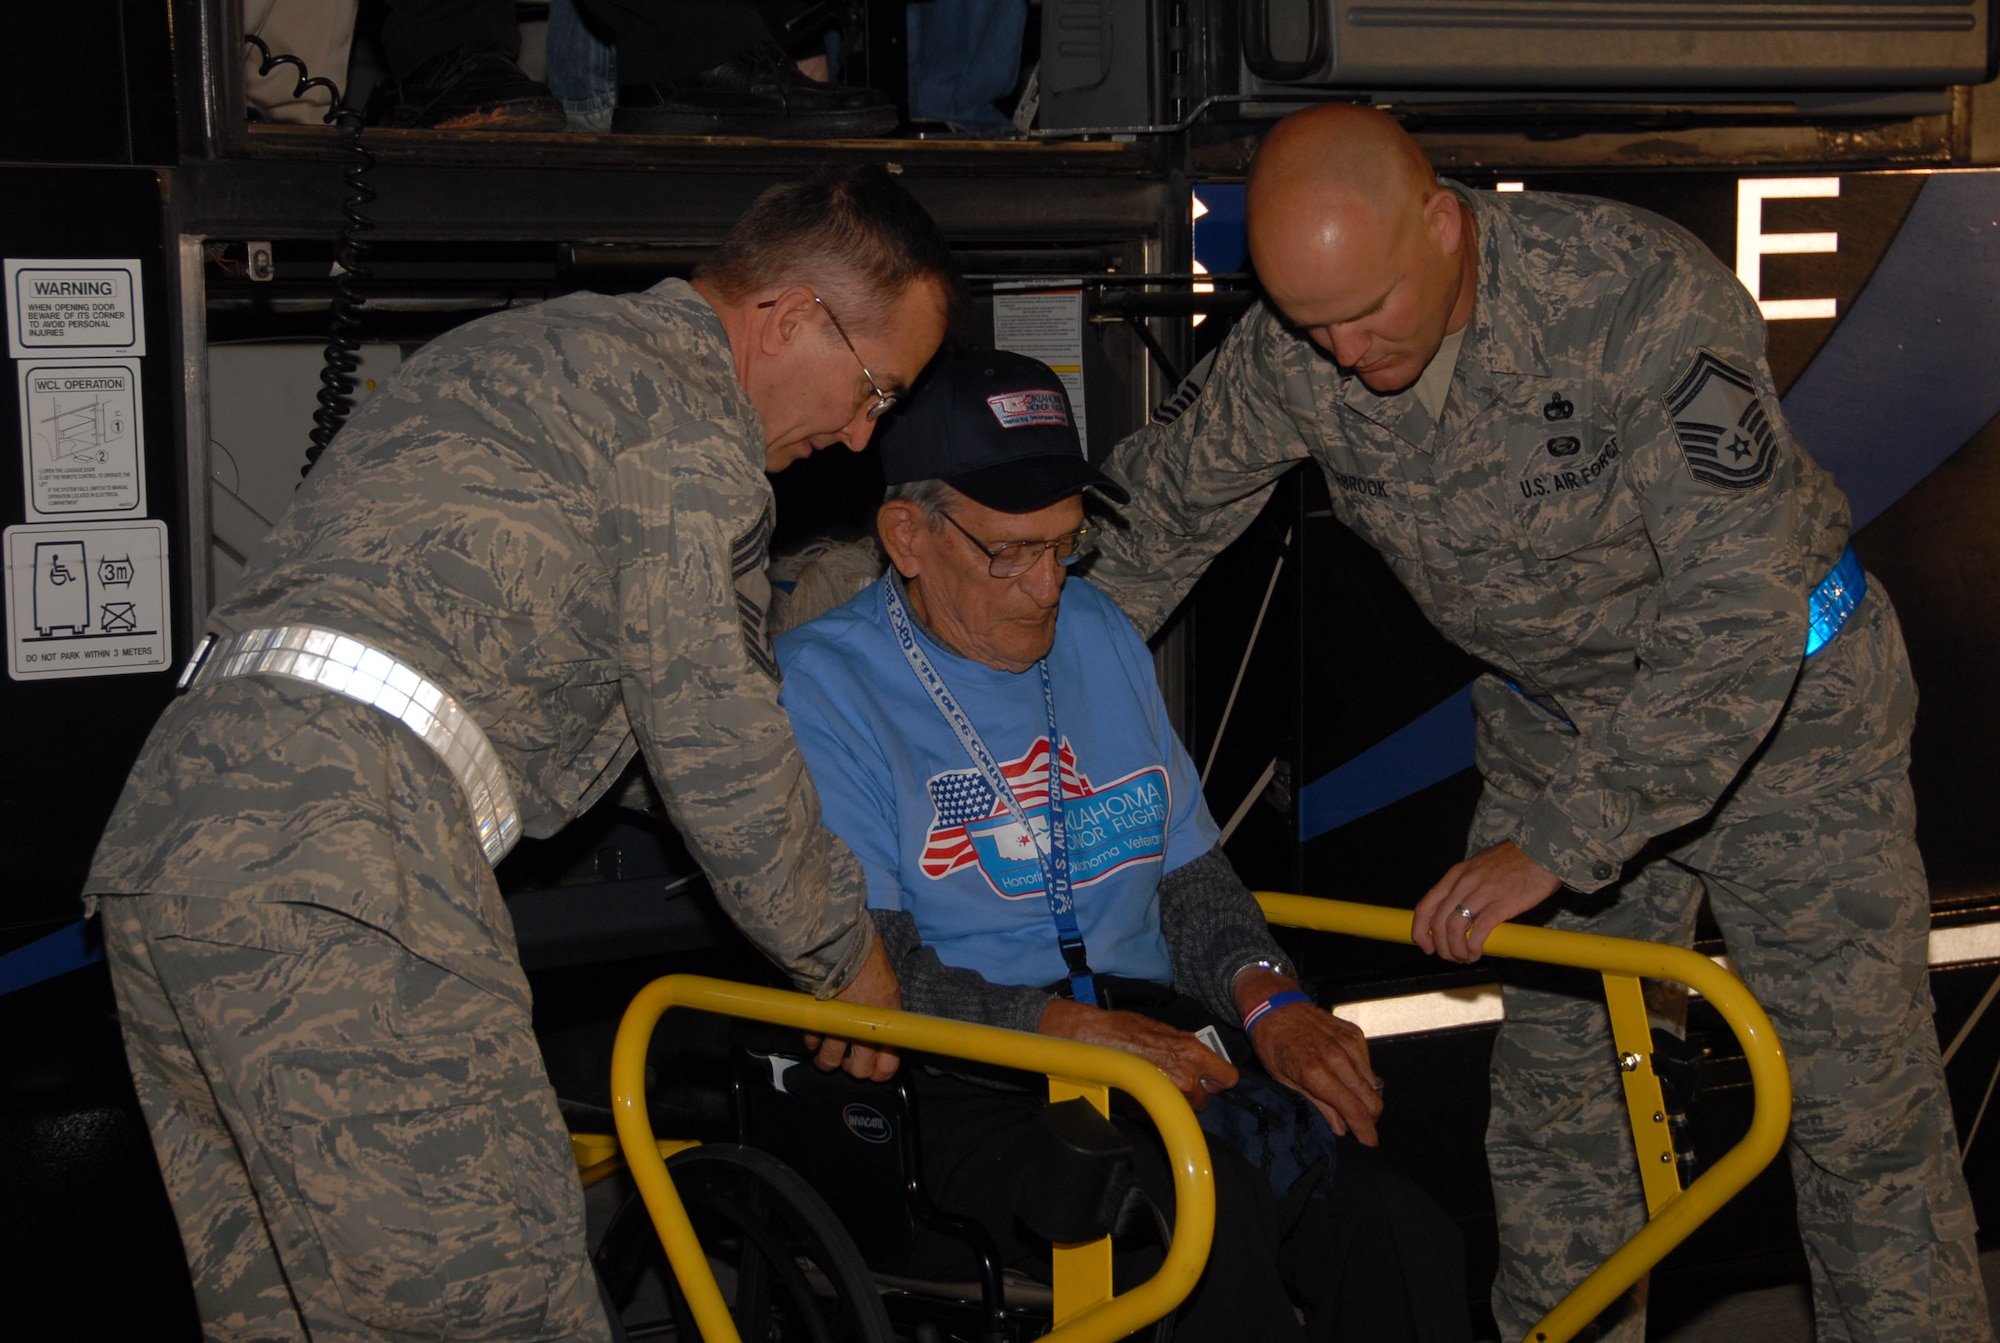 Senior Master Sgt. Stephen Rosebrook and Chief Master Sgt. Steven Keene, both assigned to the 137th Logistics Readiness Squadron, help a veteran onto an airplane on the base flight line.  Veterans who were wheelchair bound were given the royal treatment as they were lifted off the bus and carried onto the charted flight to Washington, D.C. and the World War II Memorial.